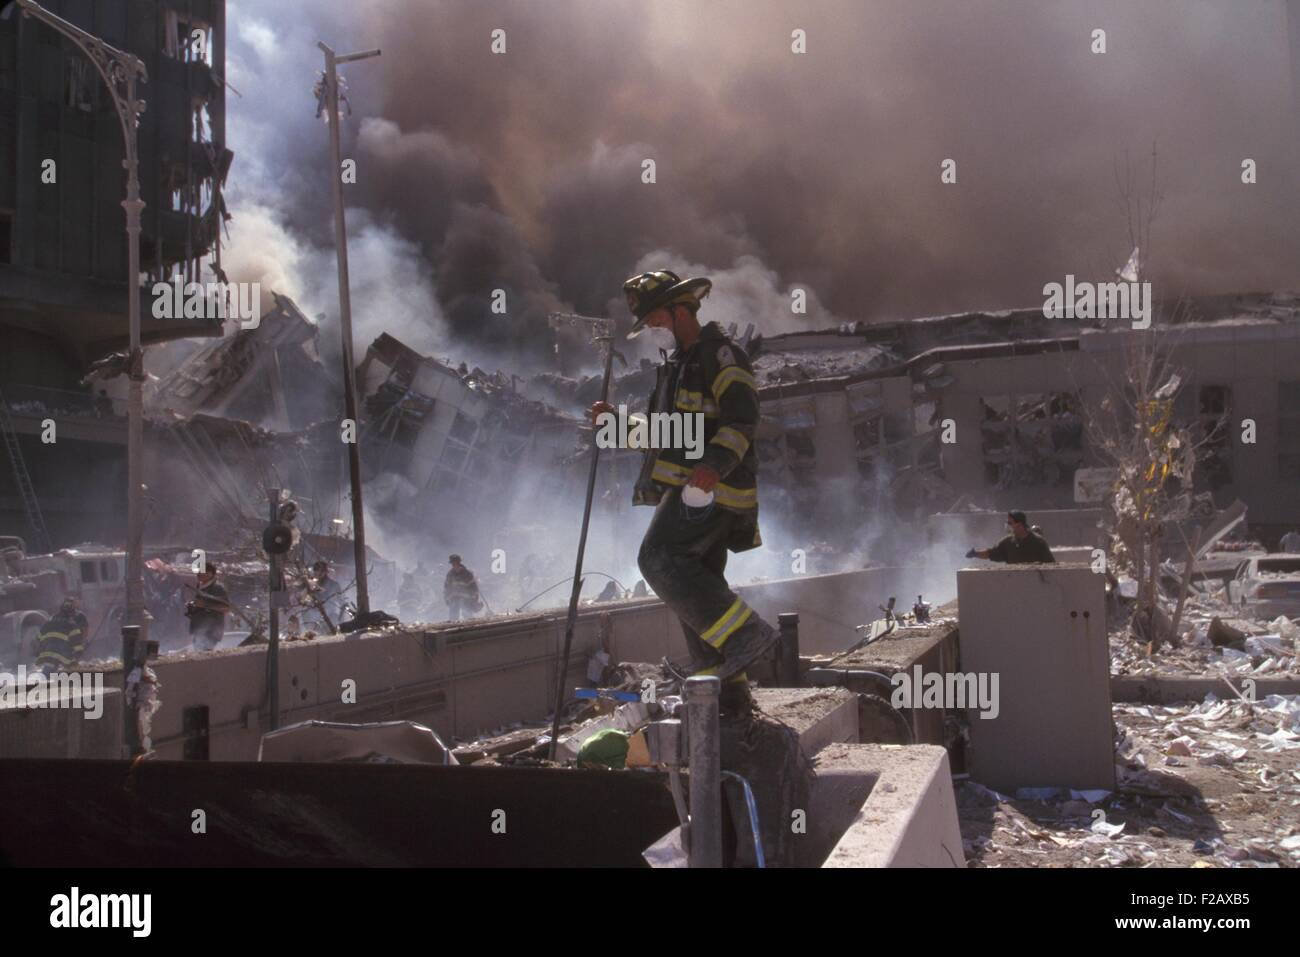 Fire fighters amid smoking rubble following September 11th terrorist attack on World Trade Center. At left is still standing WTC 6. At right is the destroyed North pedestrian bridge over West Side Highway (West St.). In the background is the burning pile of the collapsed WTC 1 (North Tower). New York City, Sept. 11, 2001. (BSLOC 2015 2 47) Stock Photo